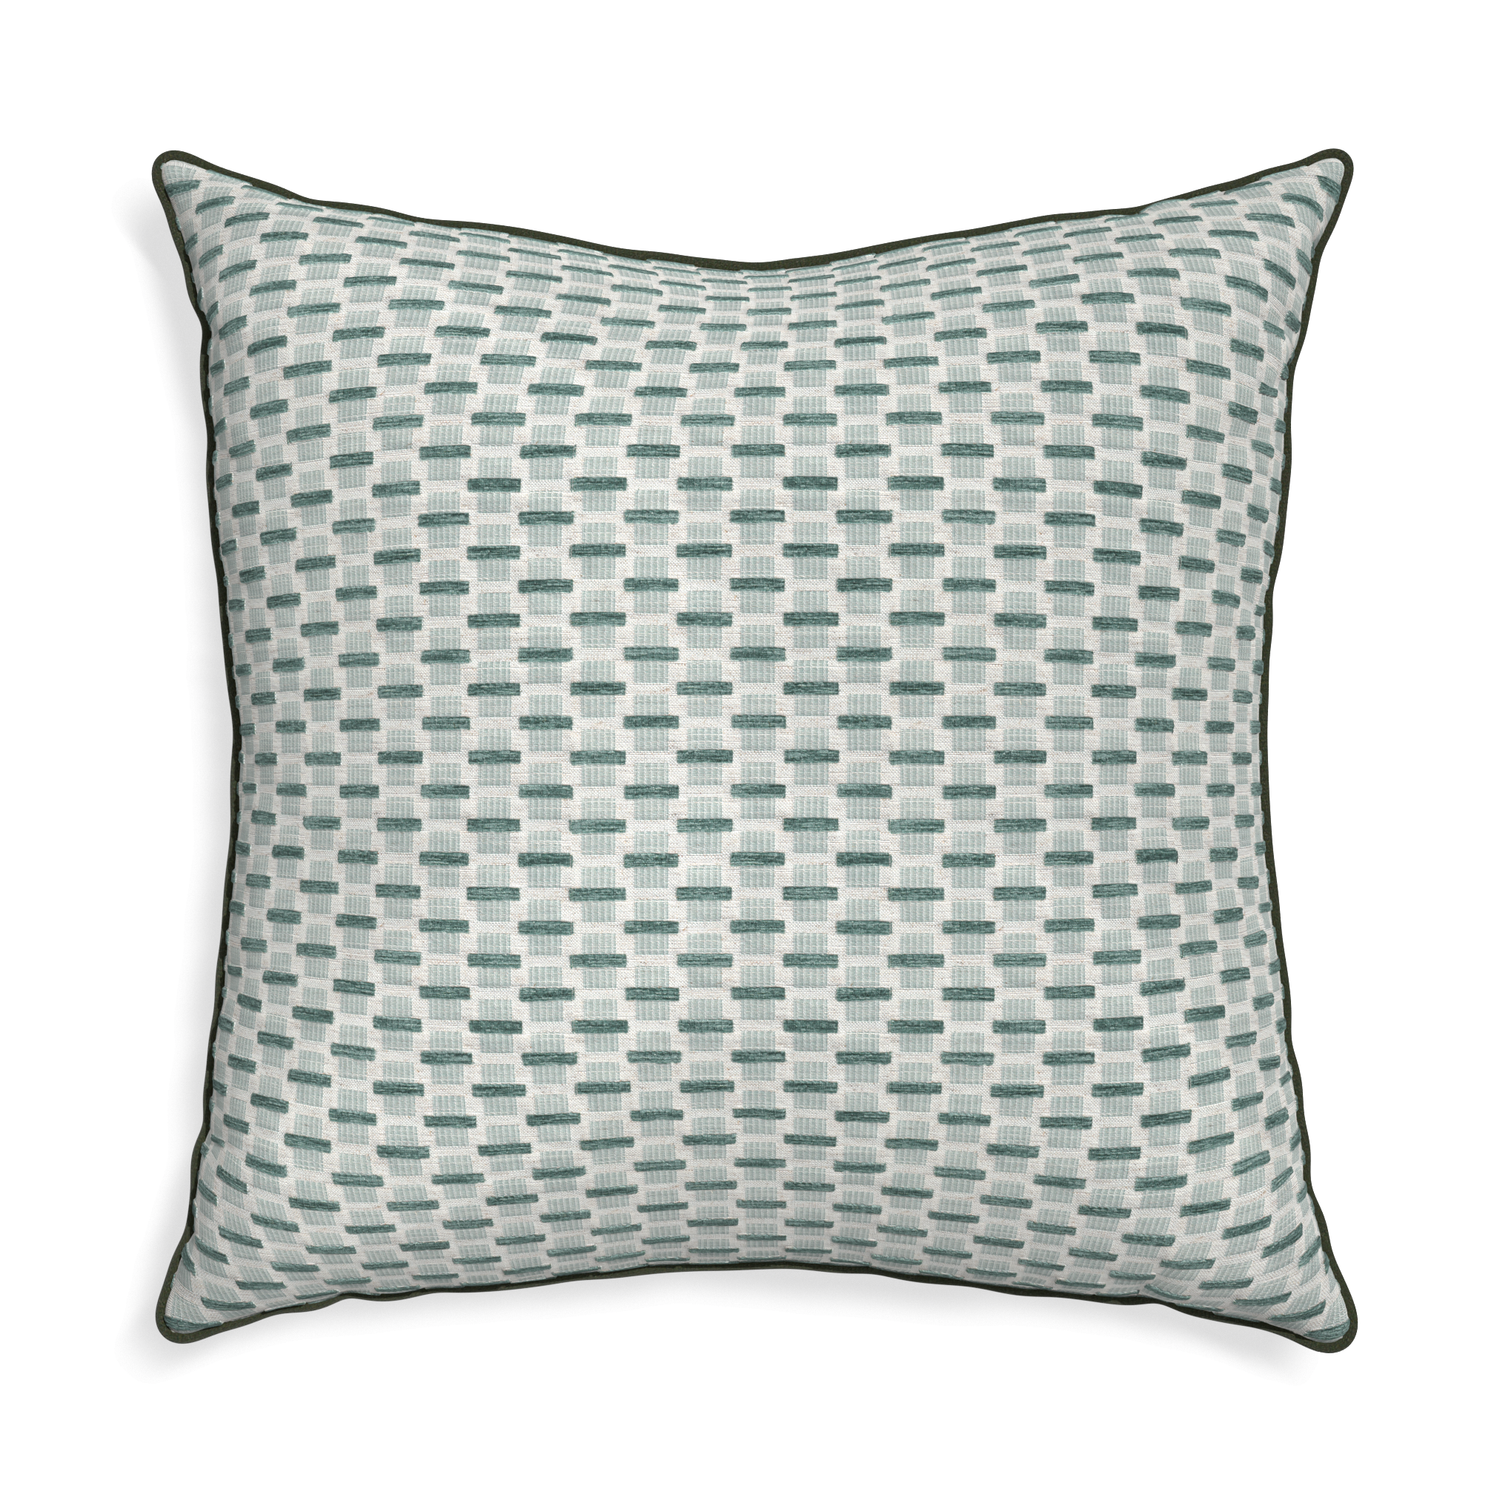 Euro-sham willow mint custom green geometric chenillepillow with f piping on white background